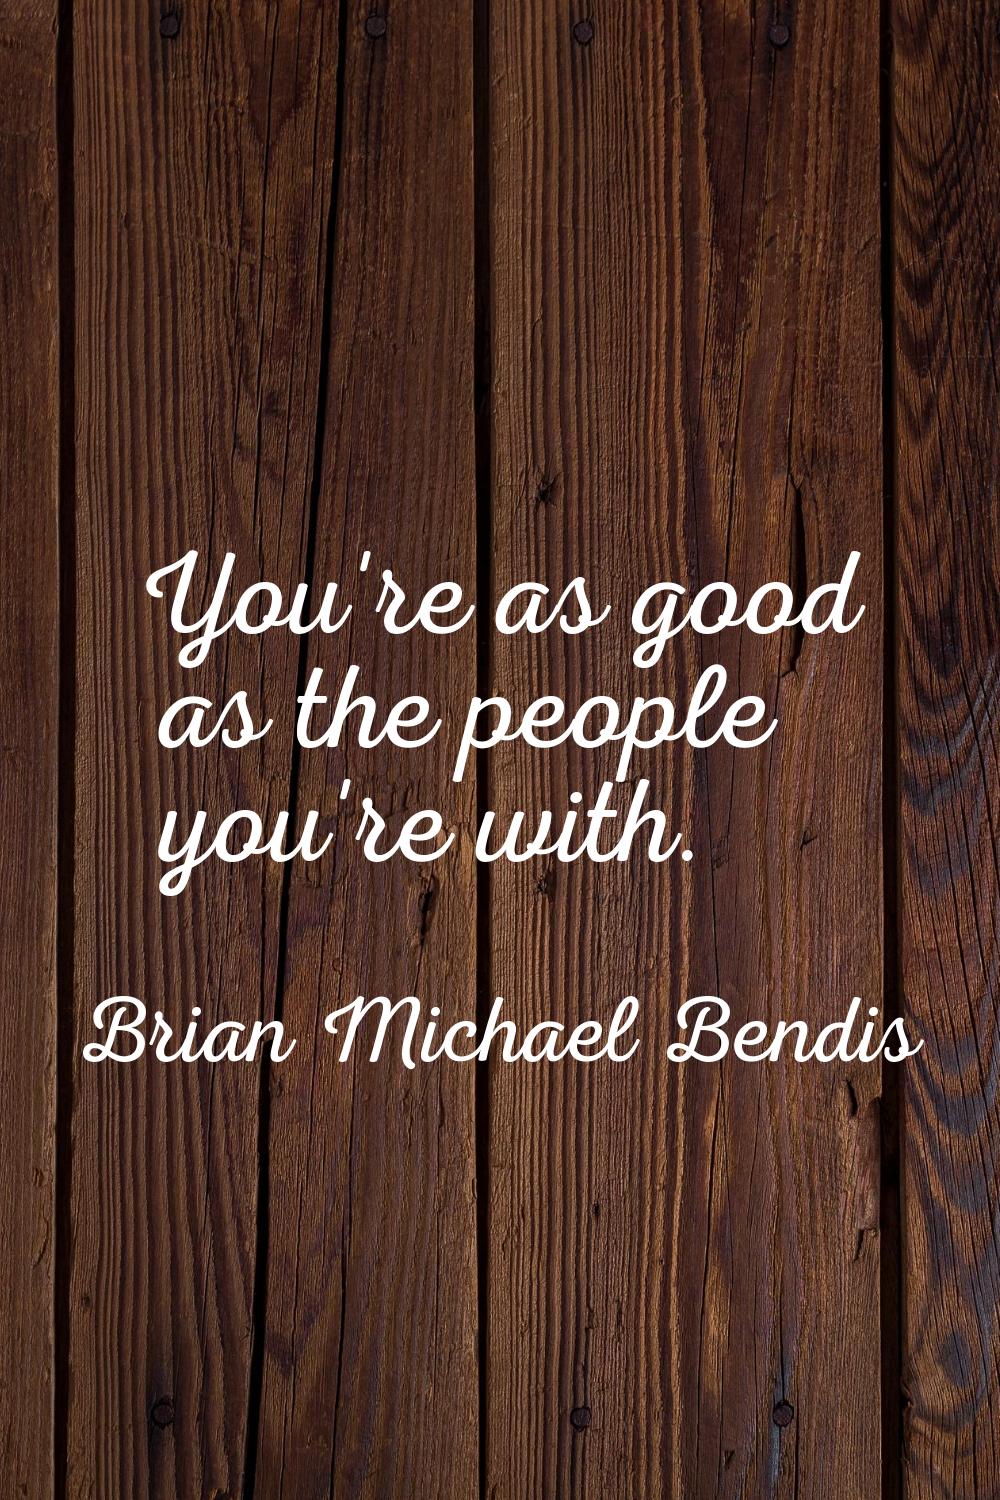 You're as good as the people you're with.